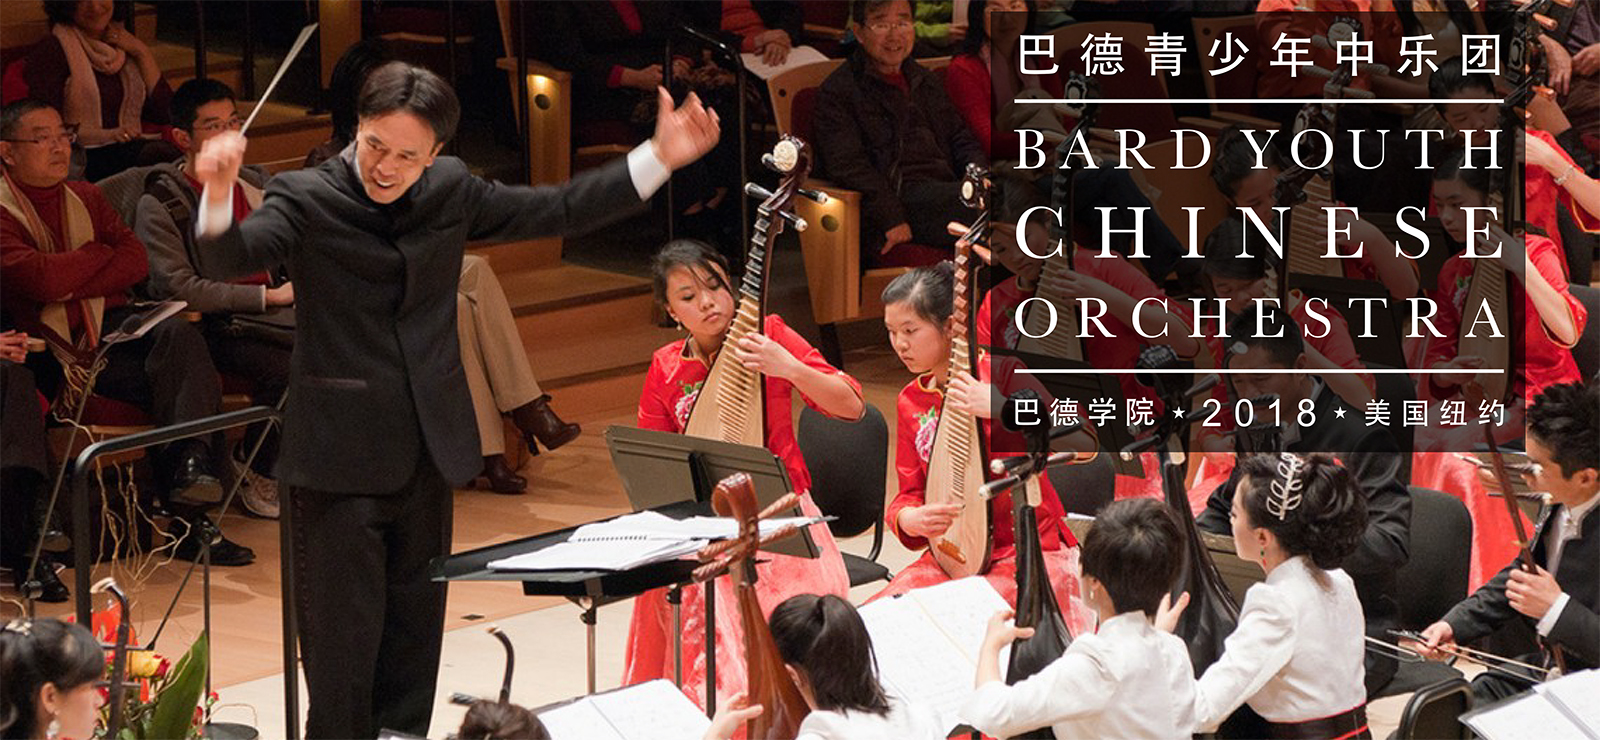 Visit http://fishercenter.bard.edu/events/Bard-Youth-Chinese-Orchestra